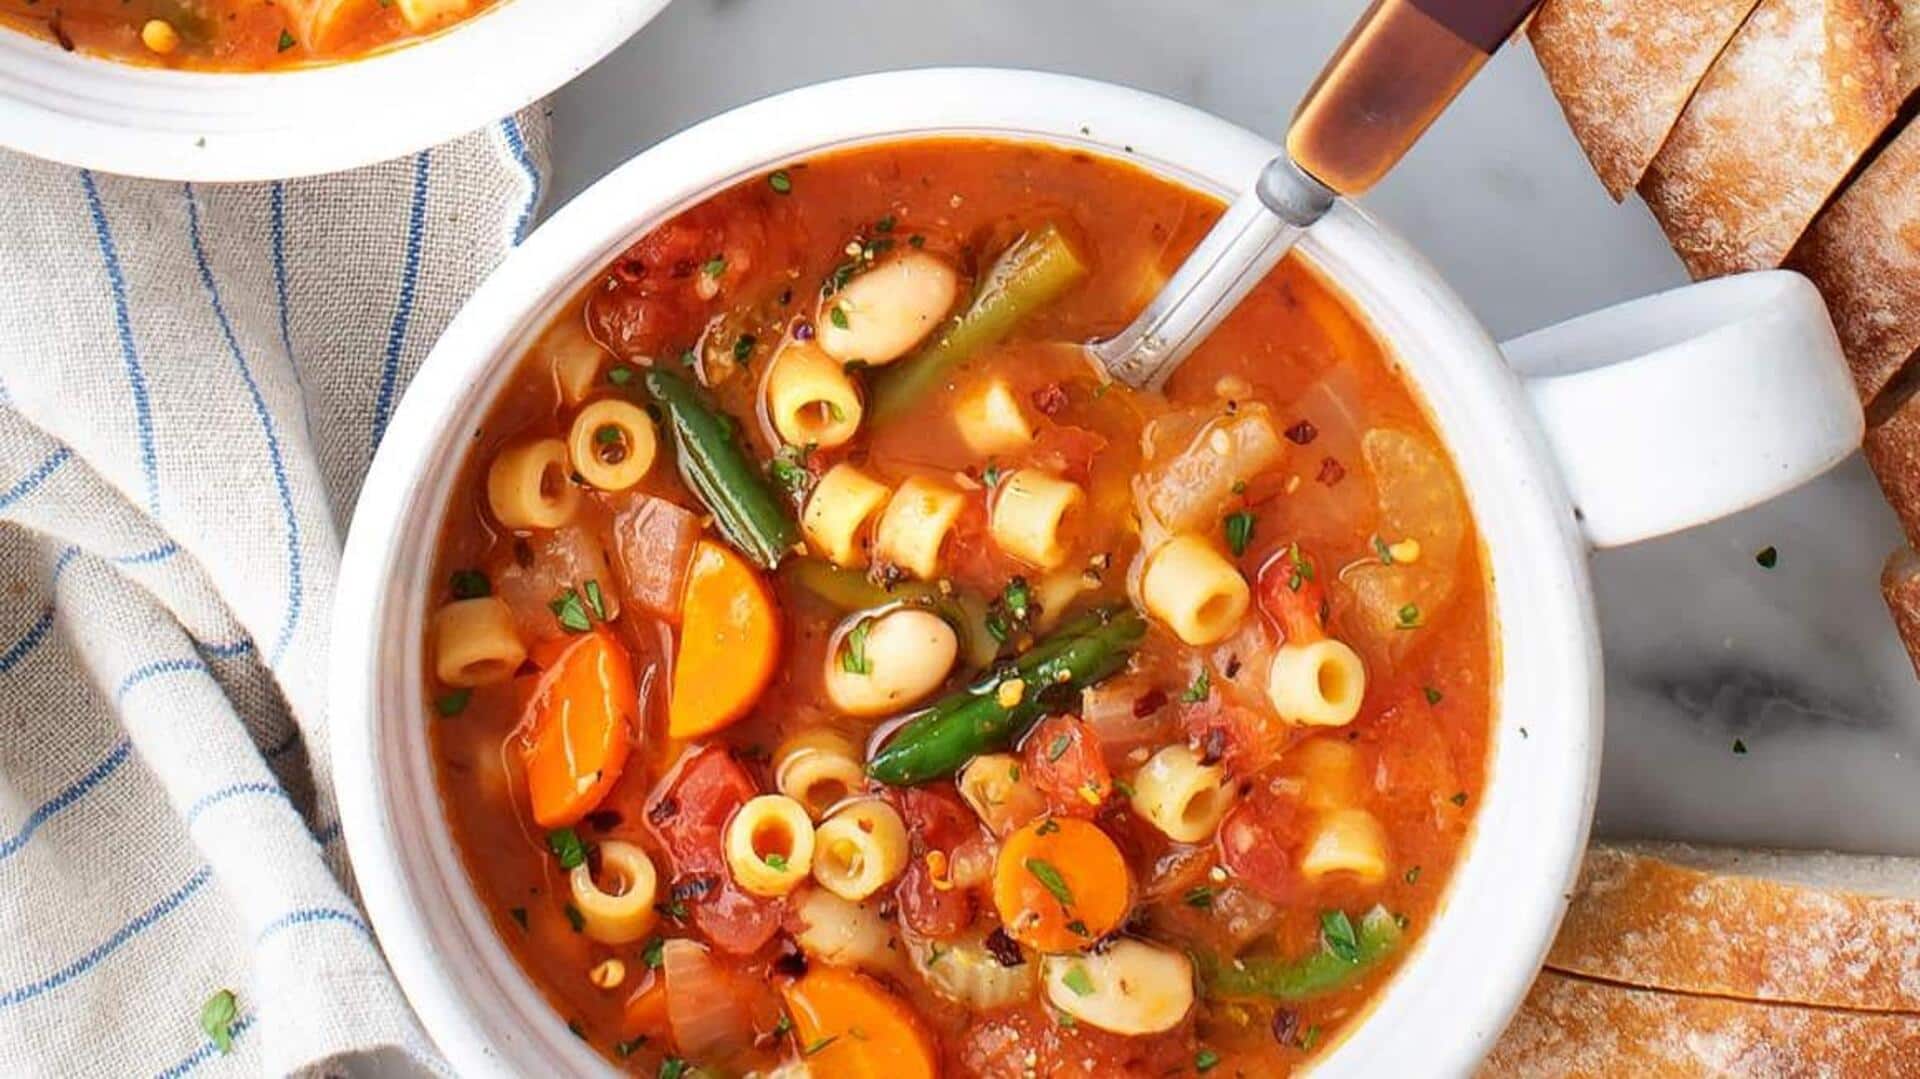 Check out this minestrone soup recipe for a refreshing day